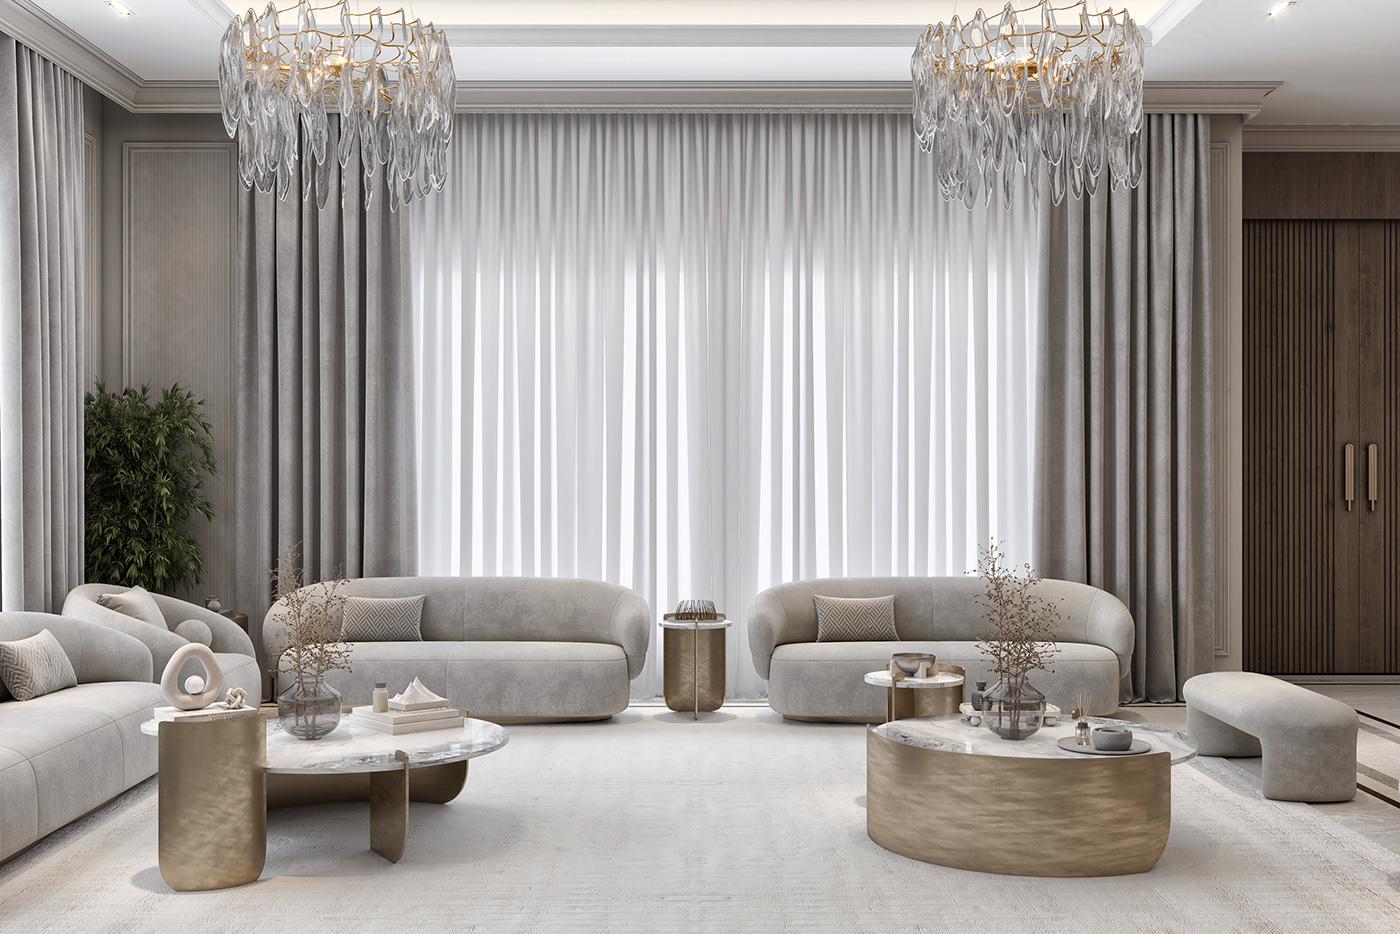 architecture visualization interior design  3ds max vray neoclassic reception seating dining plants